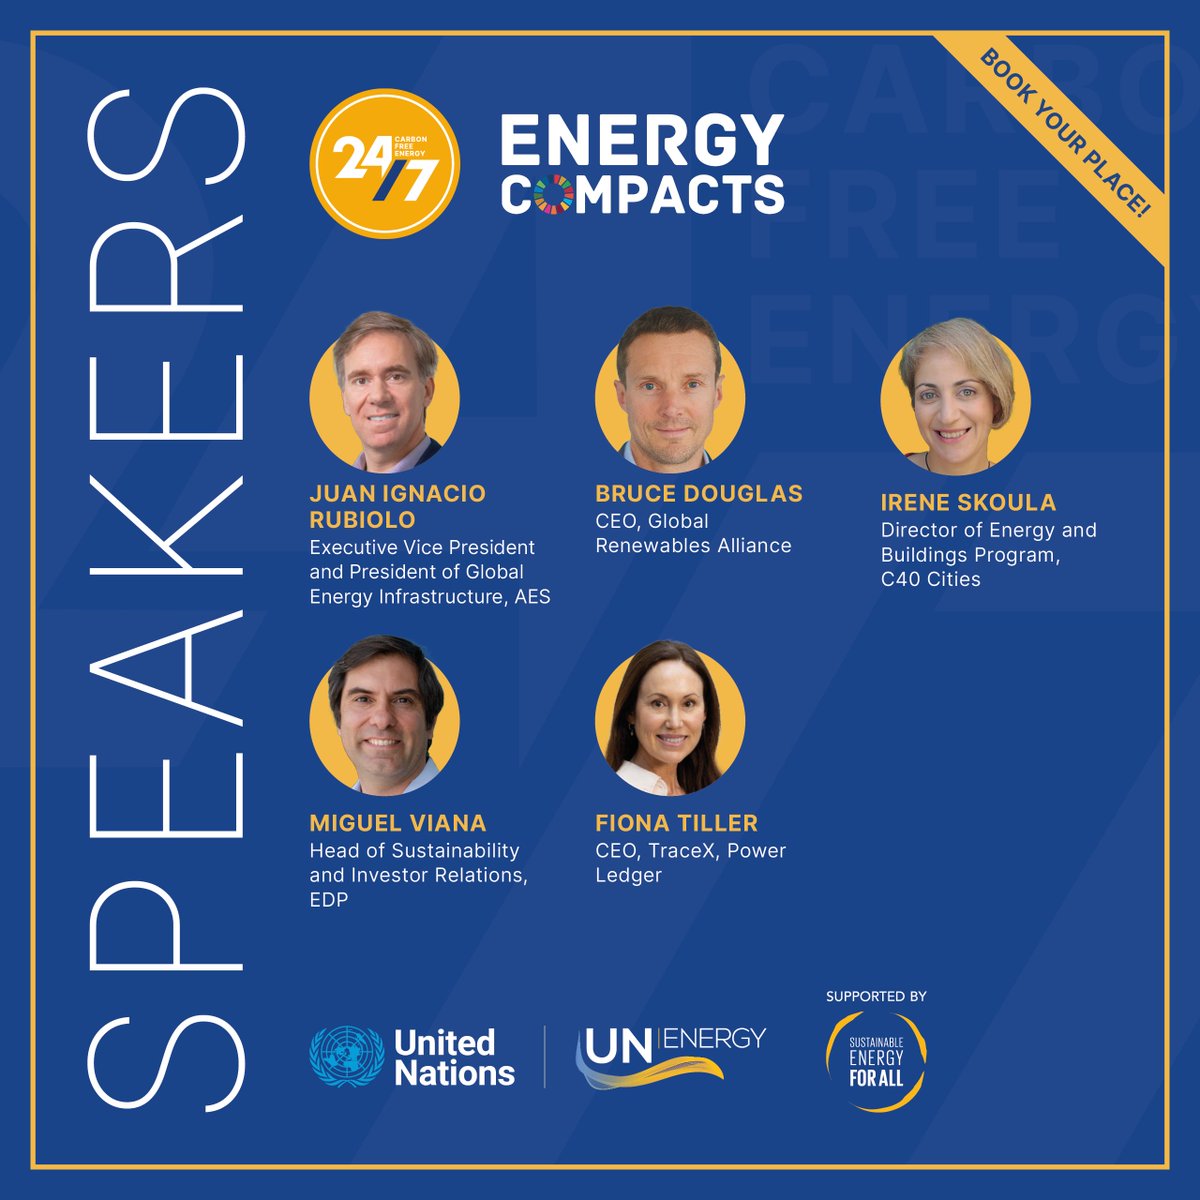 📢 Embrace the power of consumer participation in the #energytransition!

Join us TODAY, Sept 20, 8 AM ET for a '𝟮𝟰𝘅𝟳 𝗖𝗮𝗿𝗯𝗼𝗻 𝗙𝗿𝗲𝗲 𝗘𝗻𝗲𝗿𝗴𝘆' discussion on the margins of #UNG78.
Connect virtually 👉🏽 meet.google.com/agj-pzjg-gwt

#GoCarbonFree